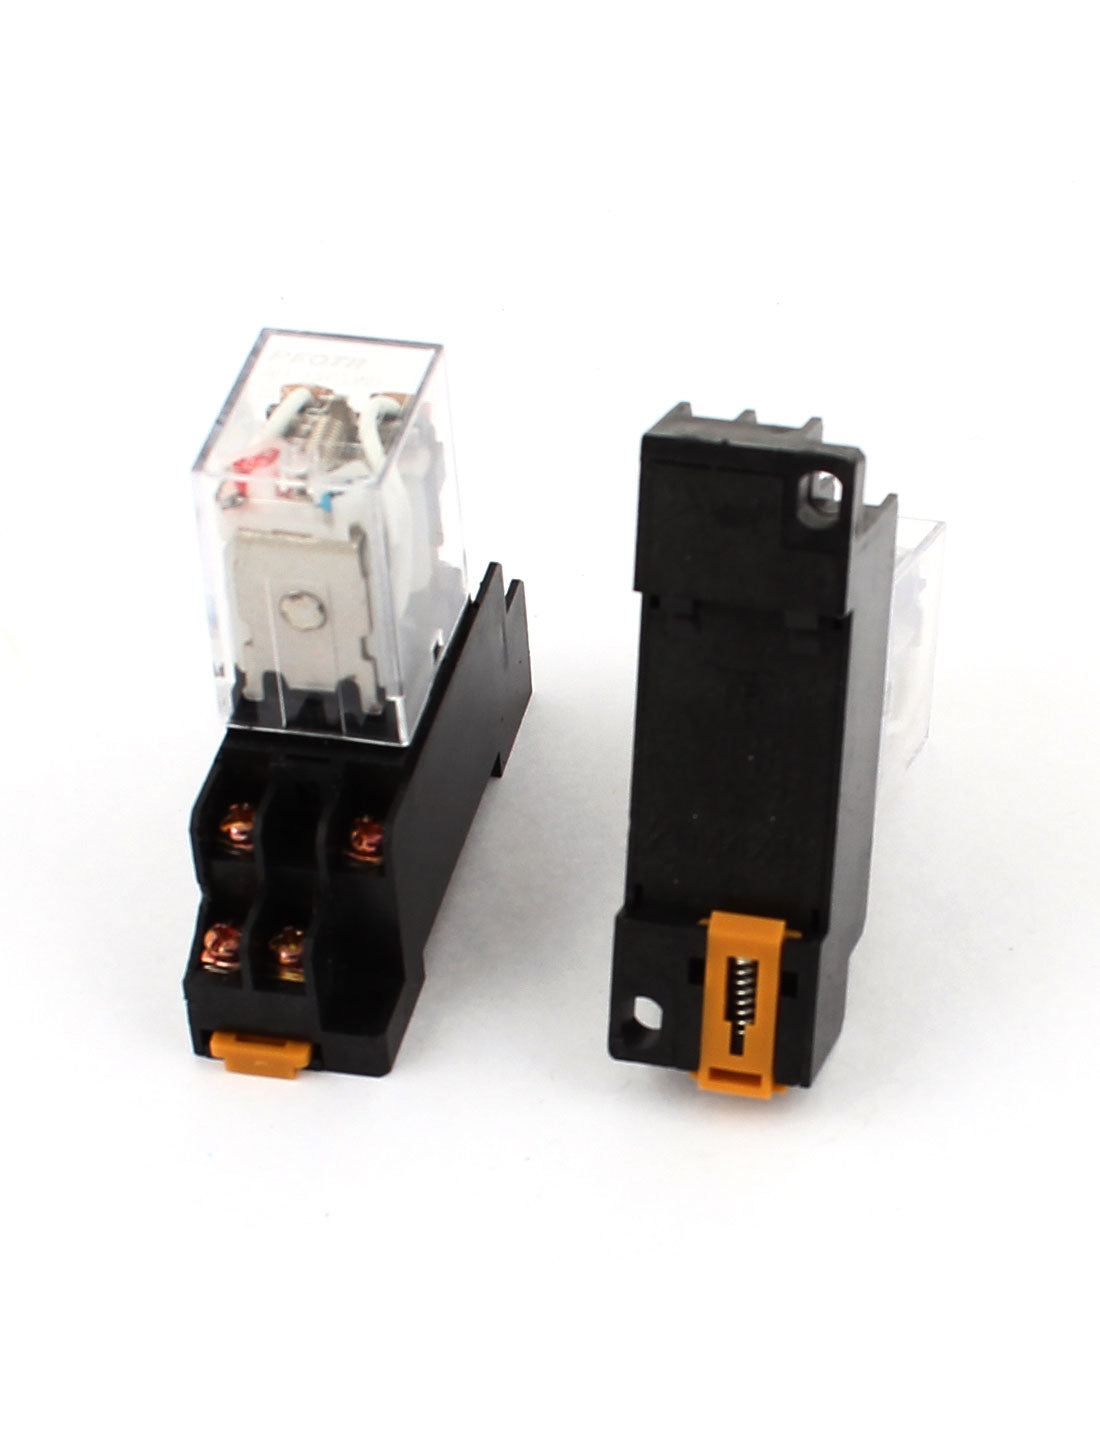 uxcell Uxcell 2pcs DC24V Coil Power Relay DPDT 8pin 35mm DIN Rail Mounted JQX-13F w Socket Base